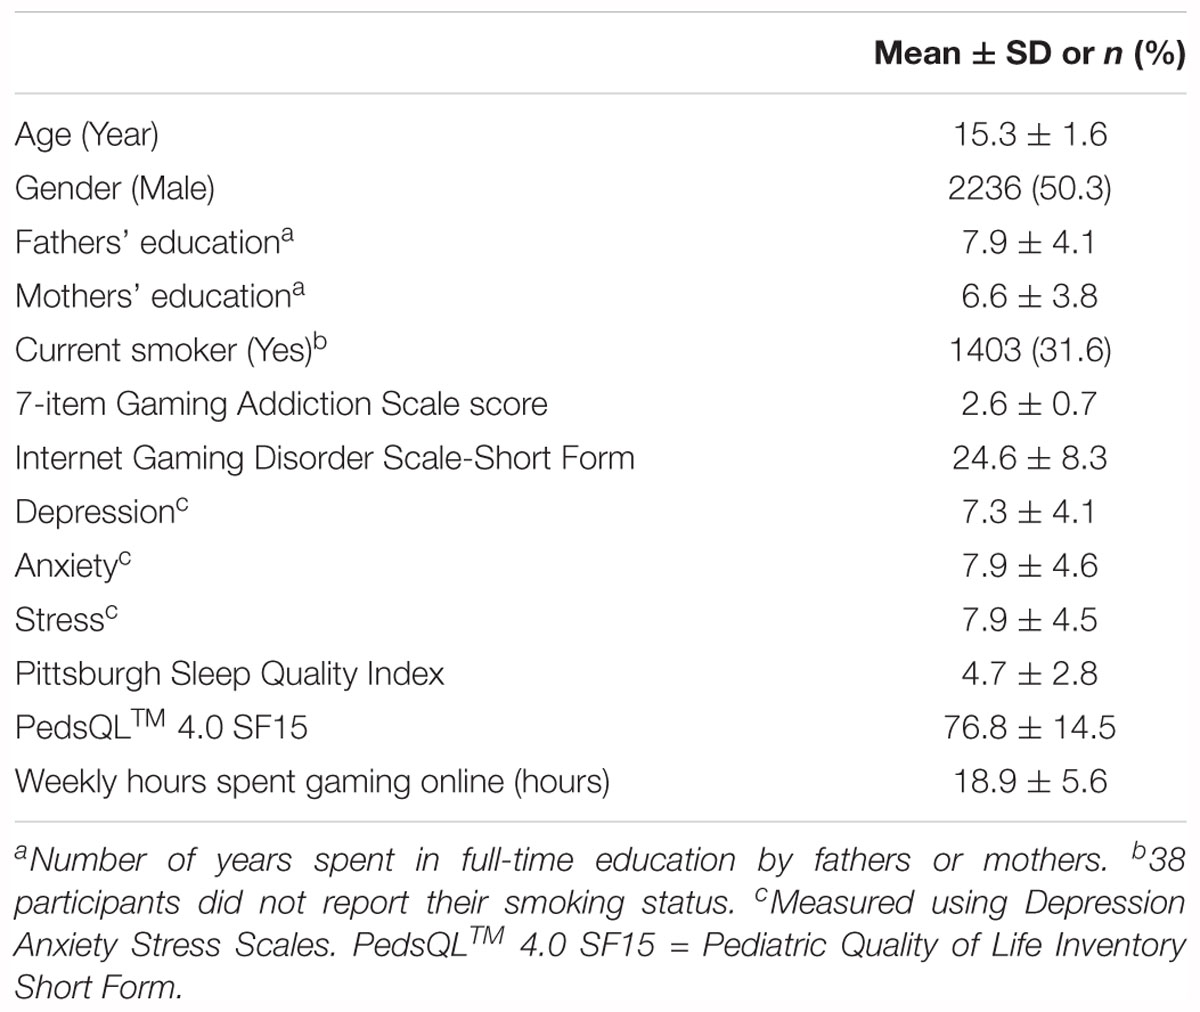 Online Game Addiction by Average Time Spent Daily Playing Games -ANOVA